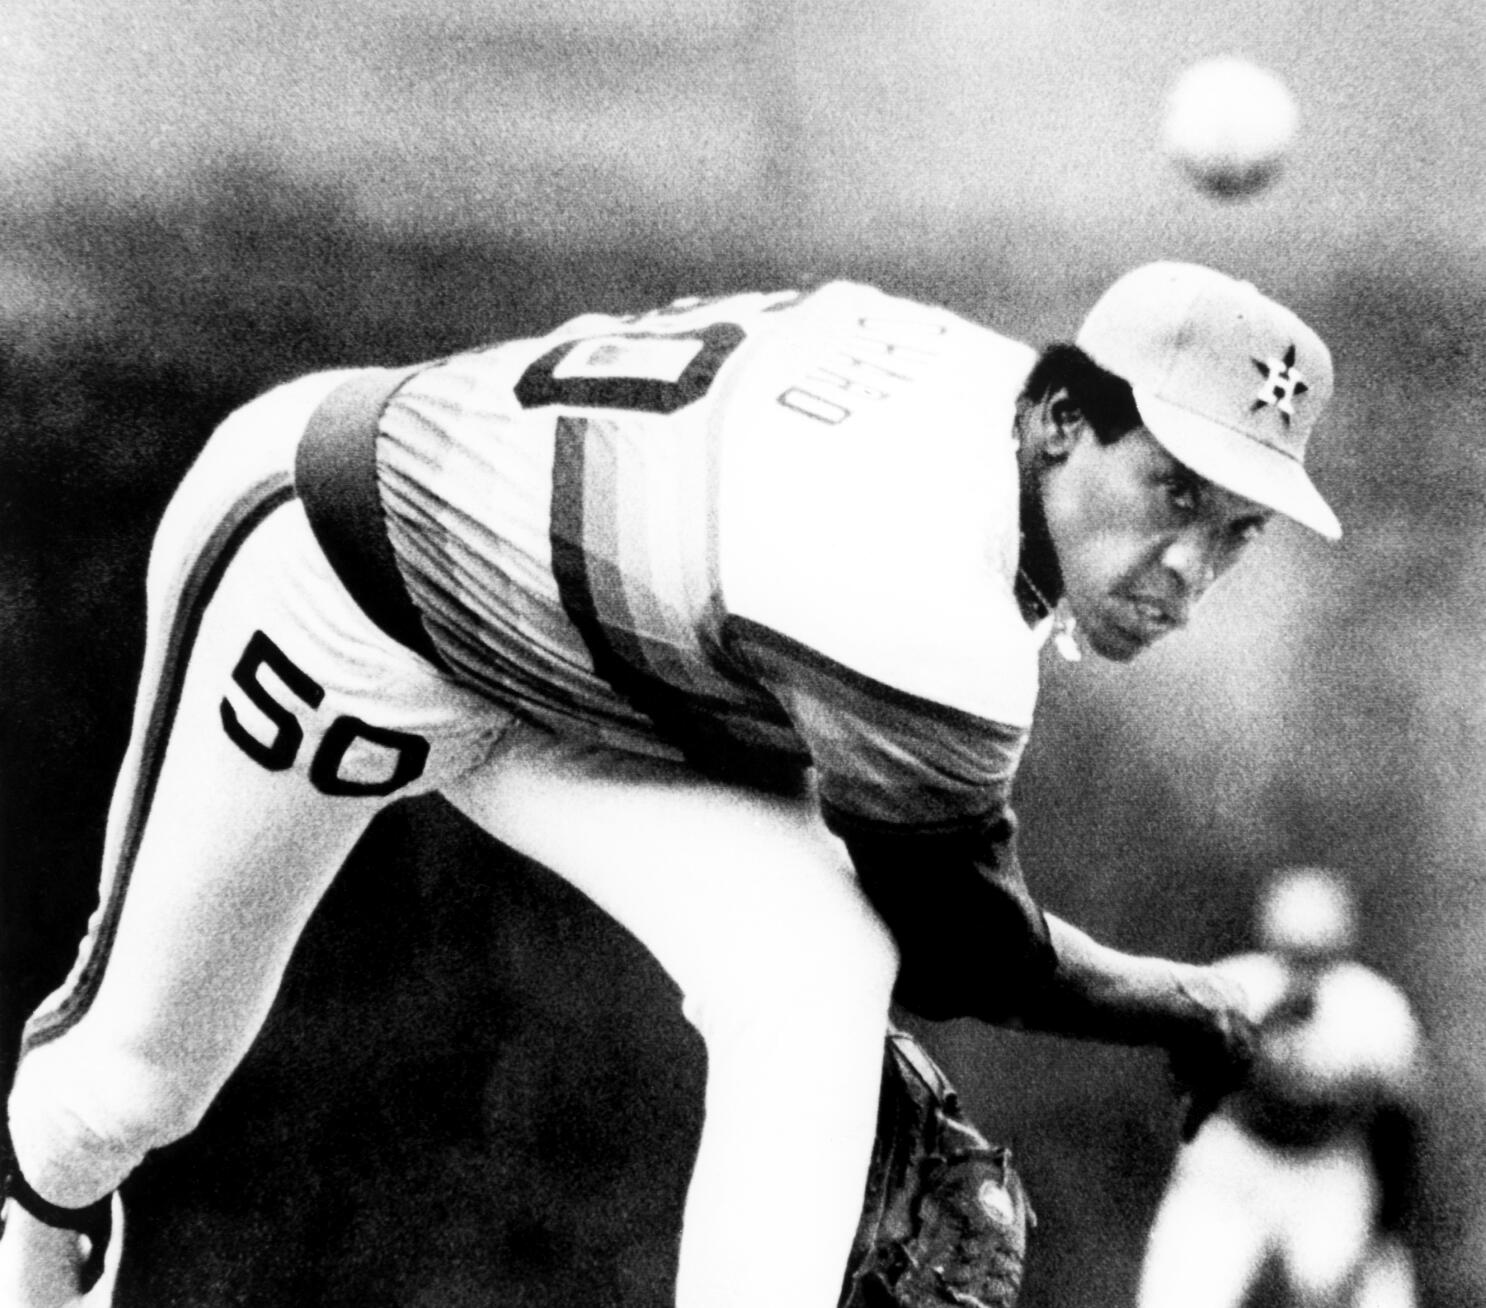 Houston Astros icon J.R. Richard, whose career was cut short by stroke in  1980, dies at age 71 - ESPN